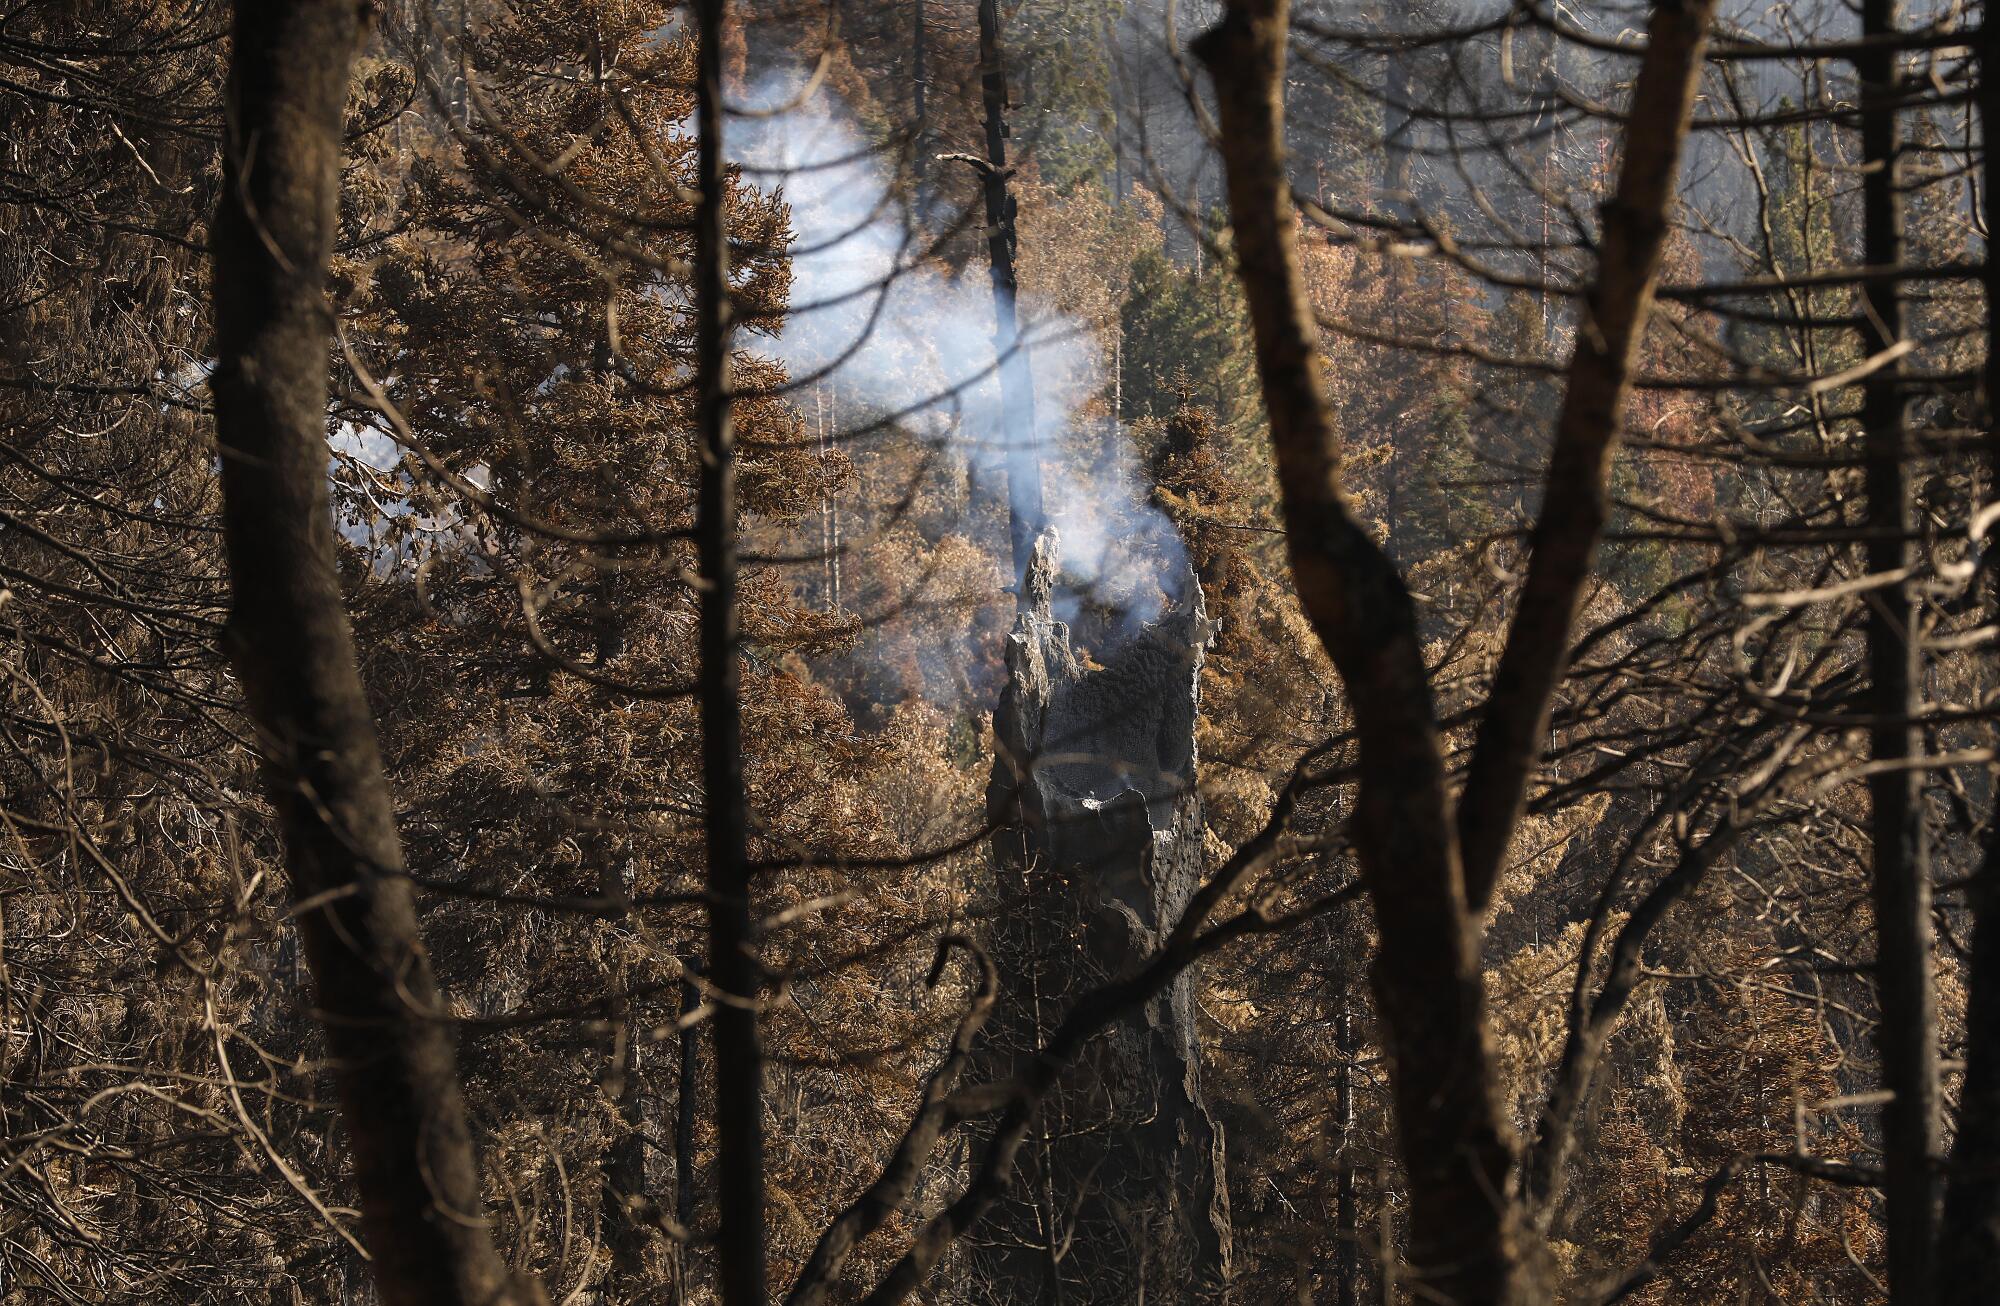 Smoke rises from the top of the charred remains of a tree